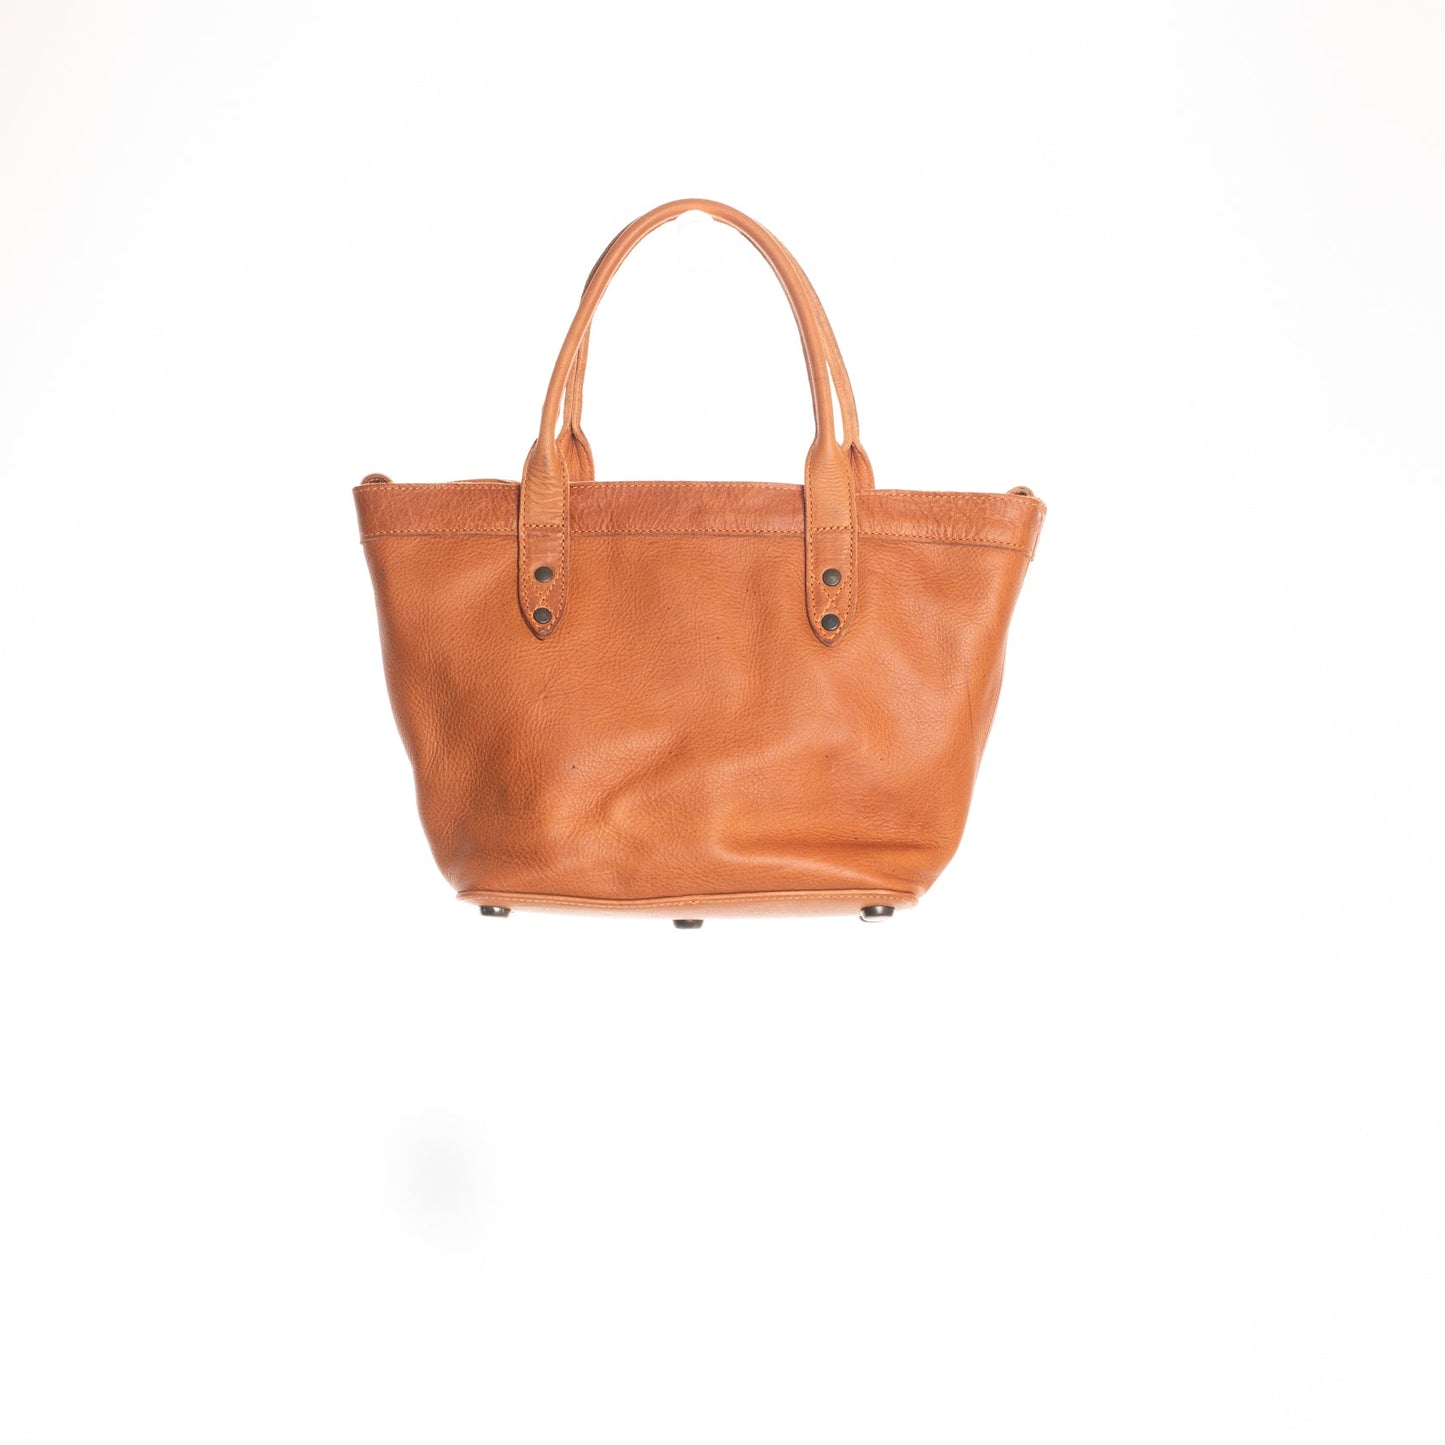 MINI CONVERTIBLE TOTE - MEXICO COLLECTION - FULL LEATHER - OCHRE LEATHER